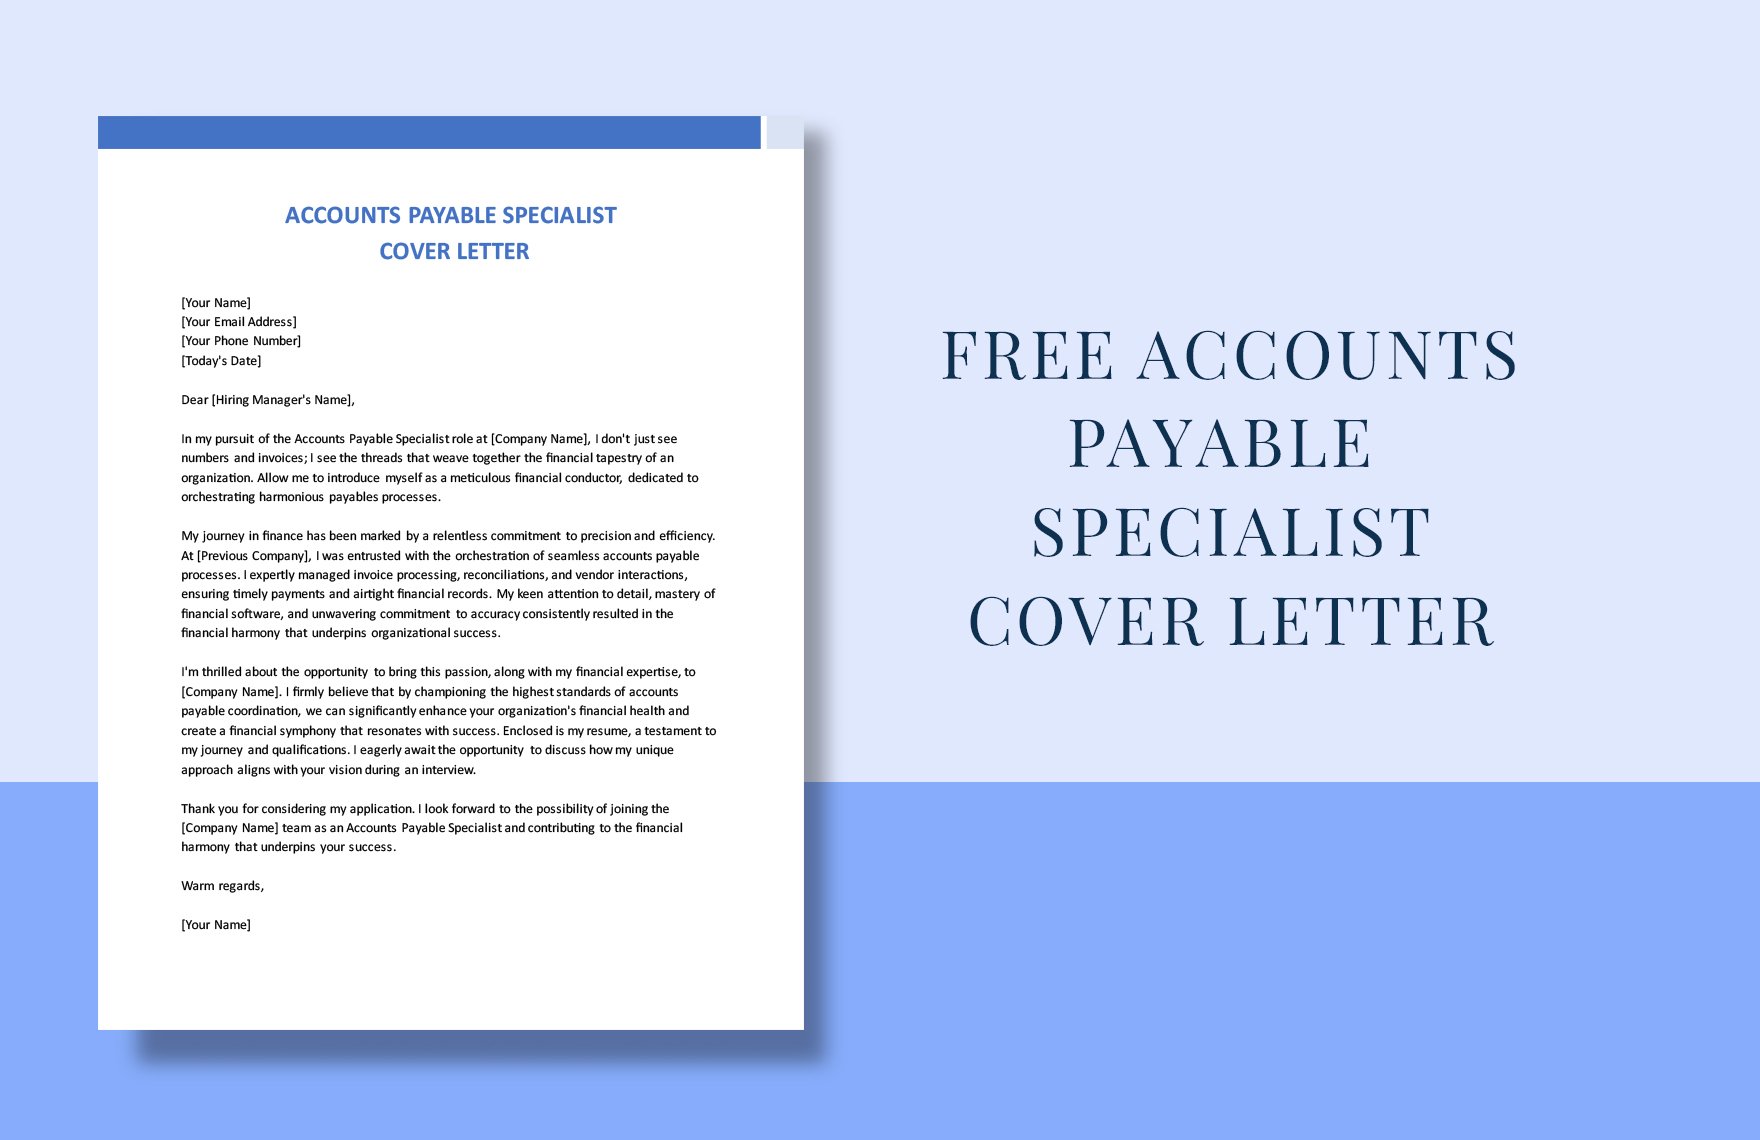 Accounts Payable Specialist Cover Letter in Word, Google Docs, PDF